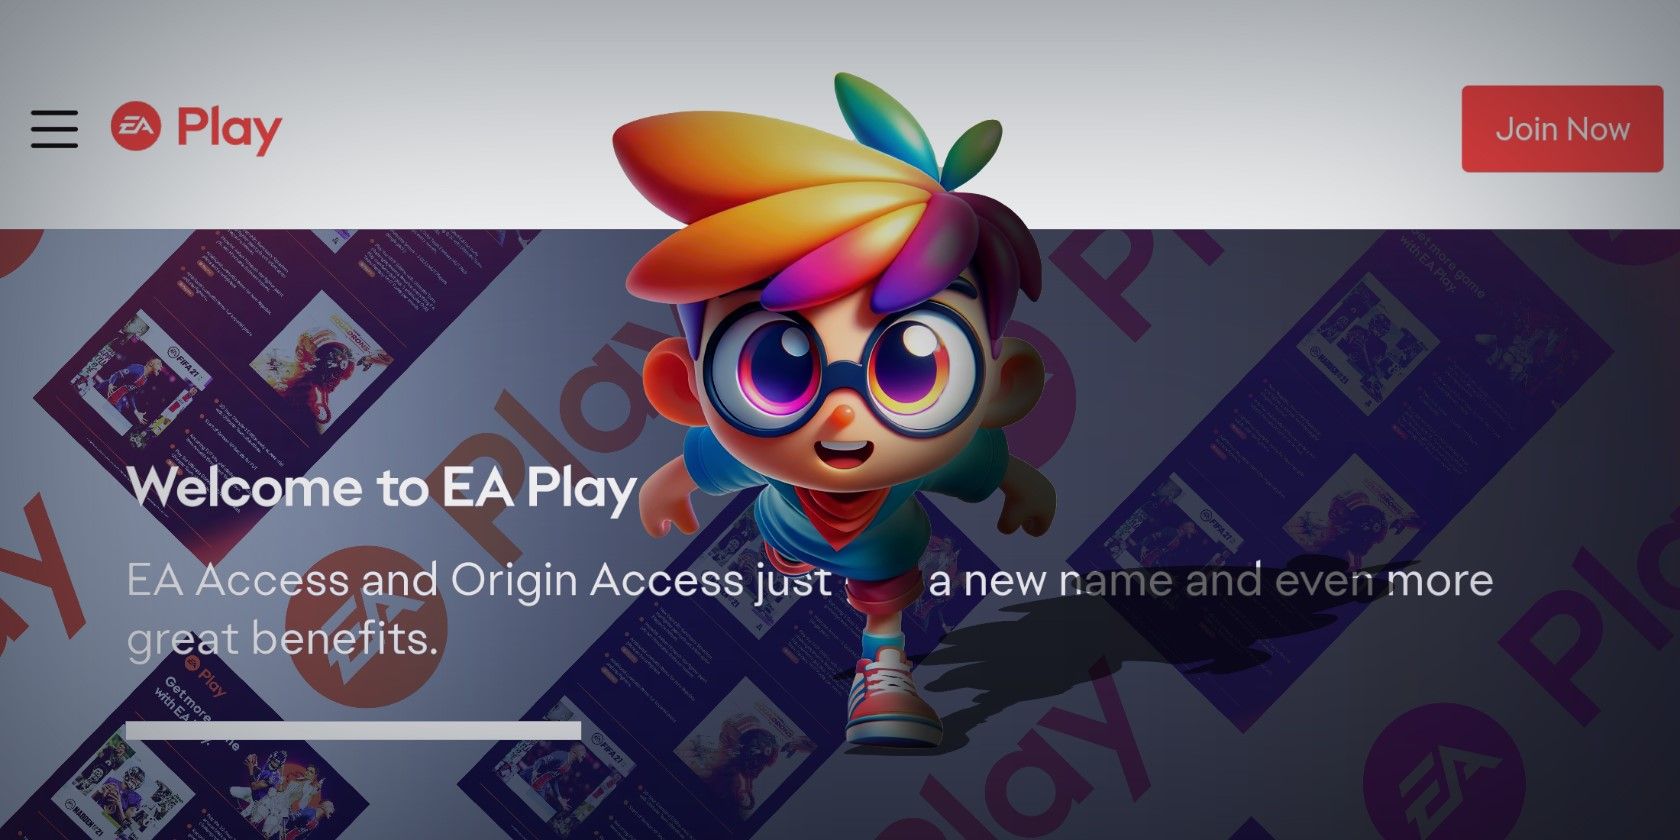  homepage for EA Play featuring a welcome message and an animated character